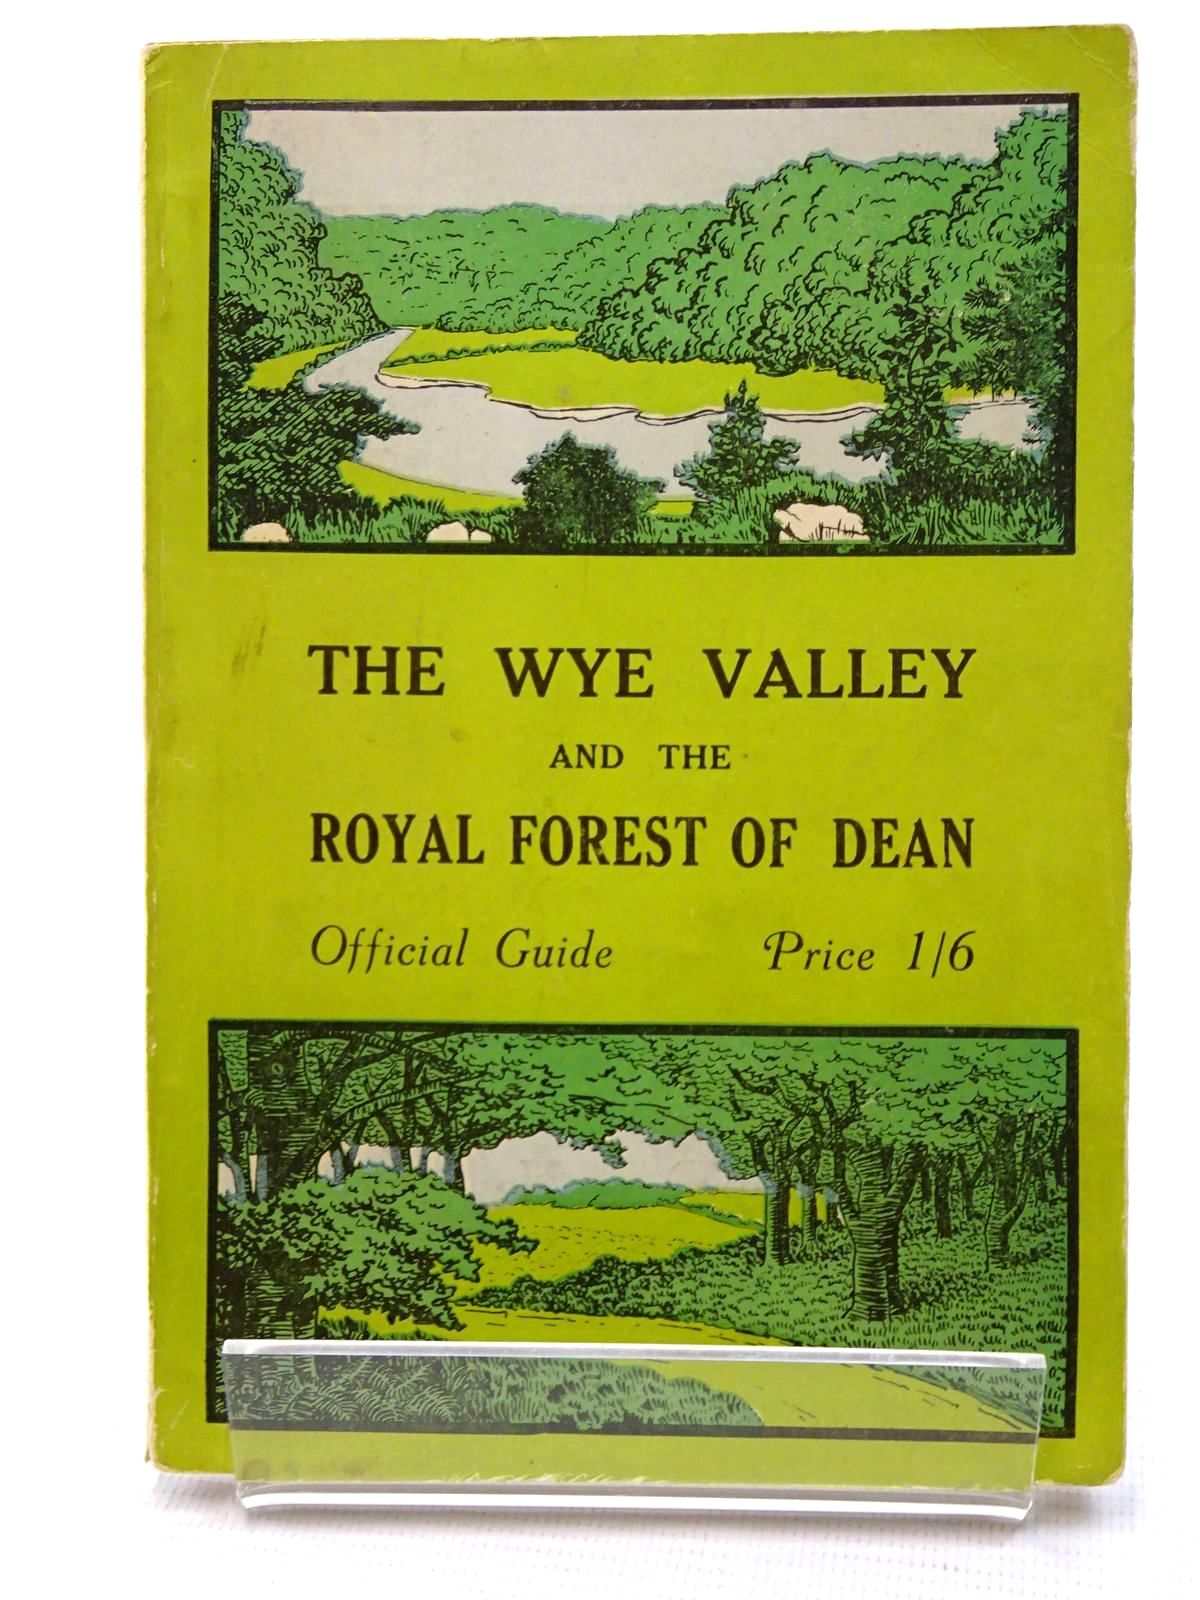 The Wye Valley and the Royal Forest of Dean